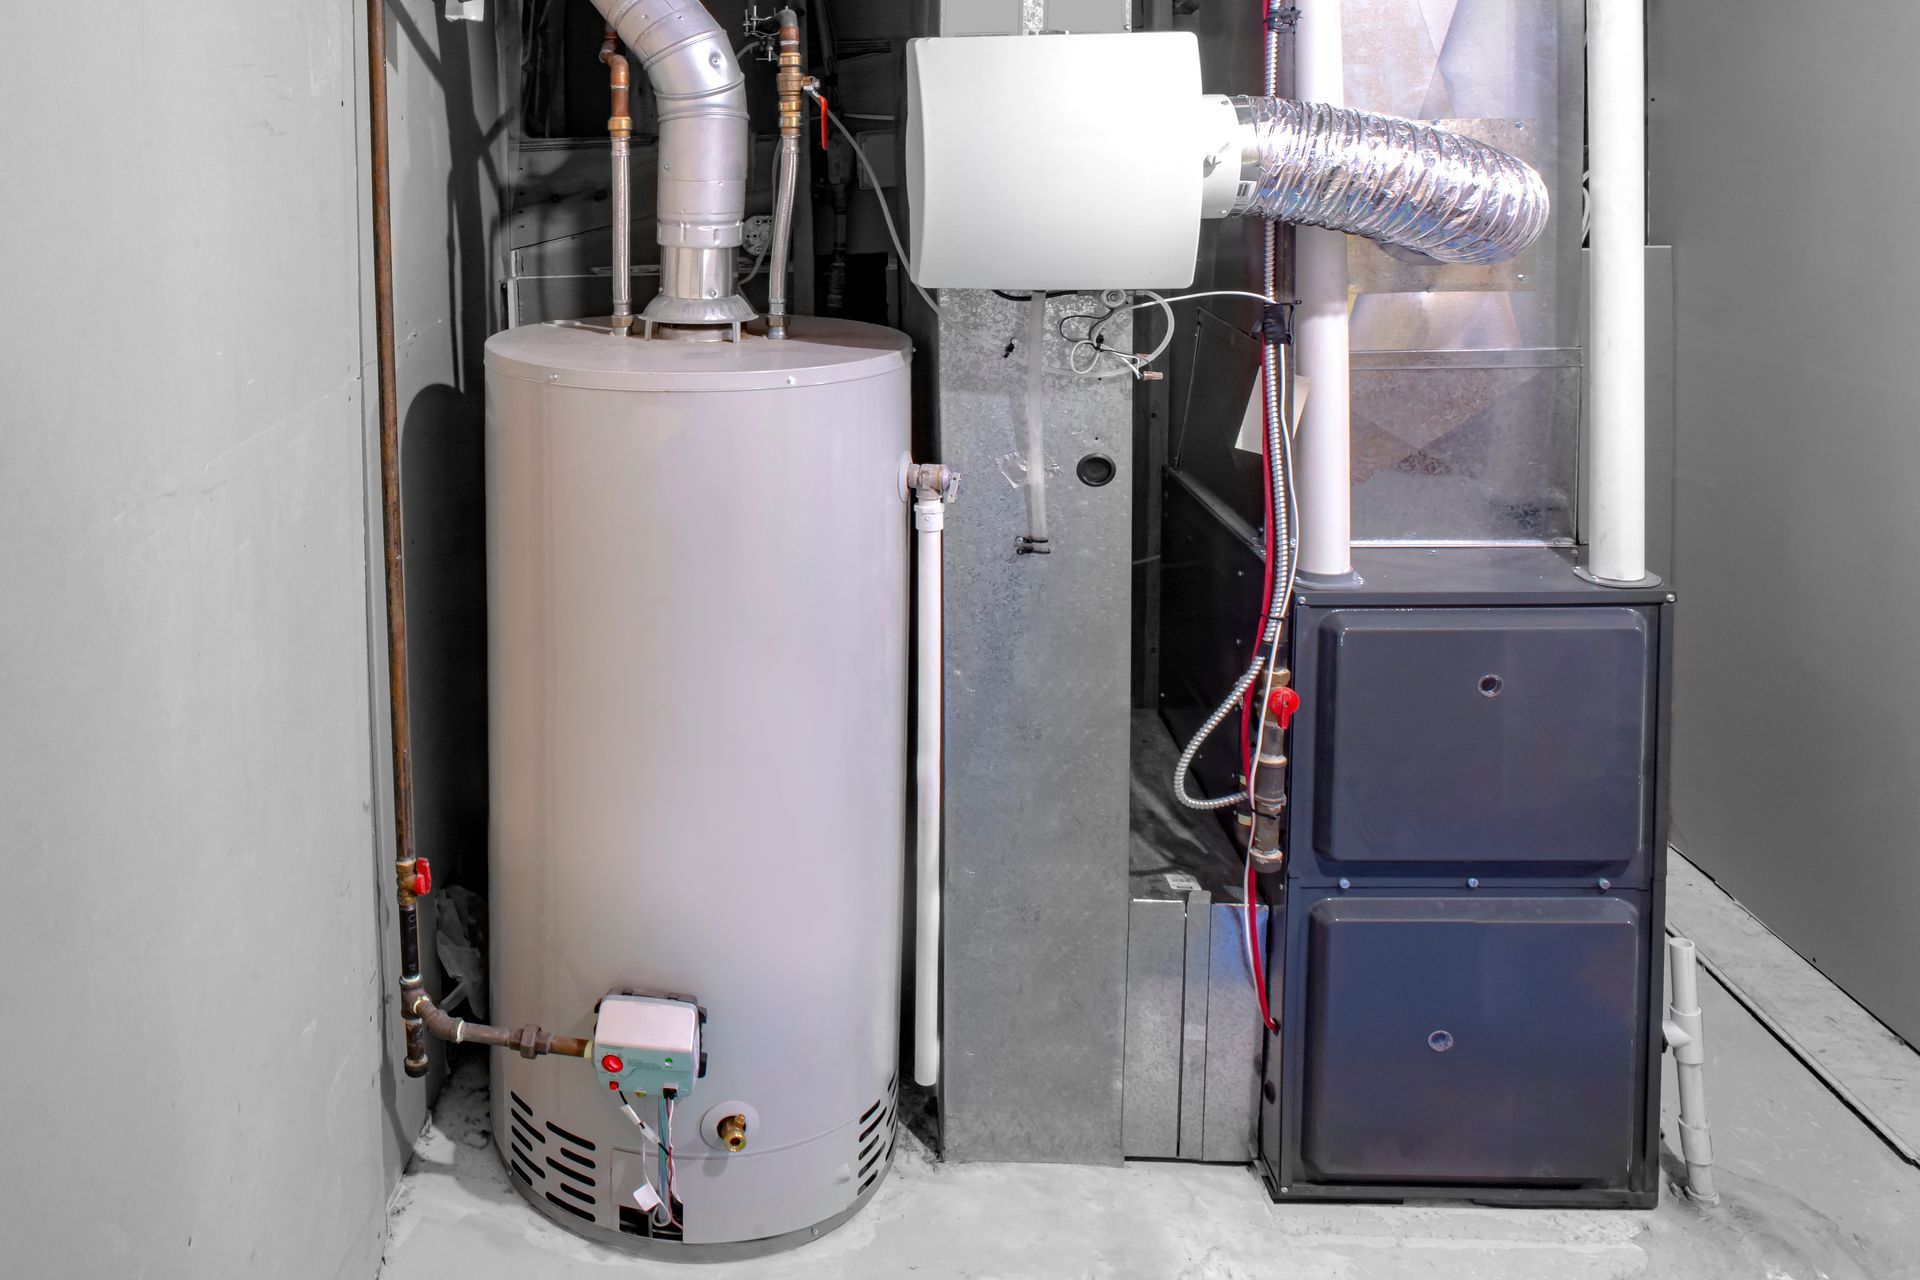 Image of a high-efficiency furnace being installed in a residential home, accompanied by a gas water heater and a humidifier.